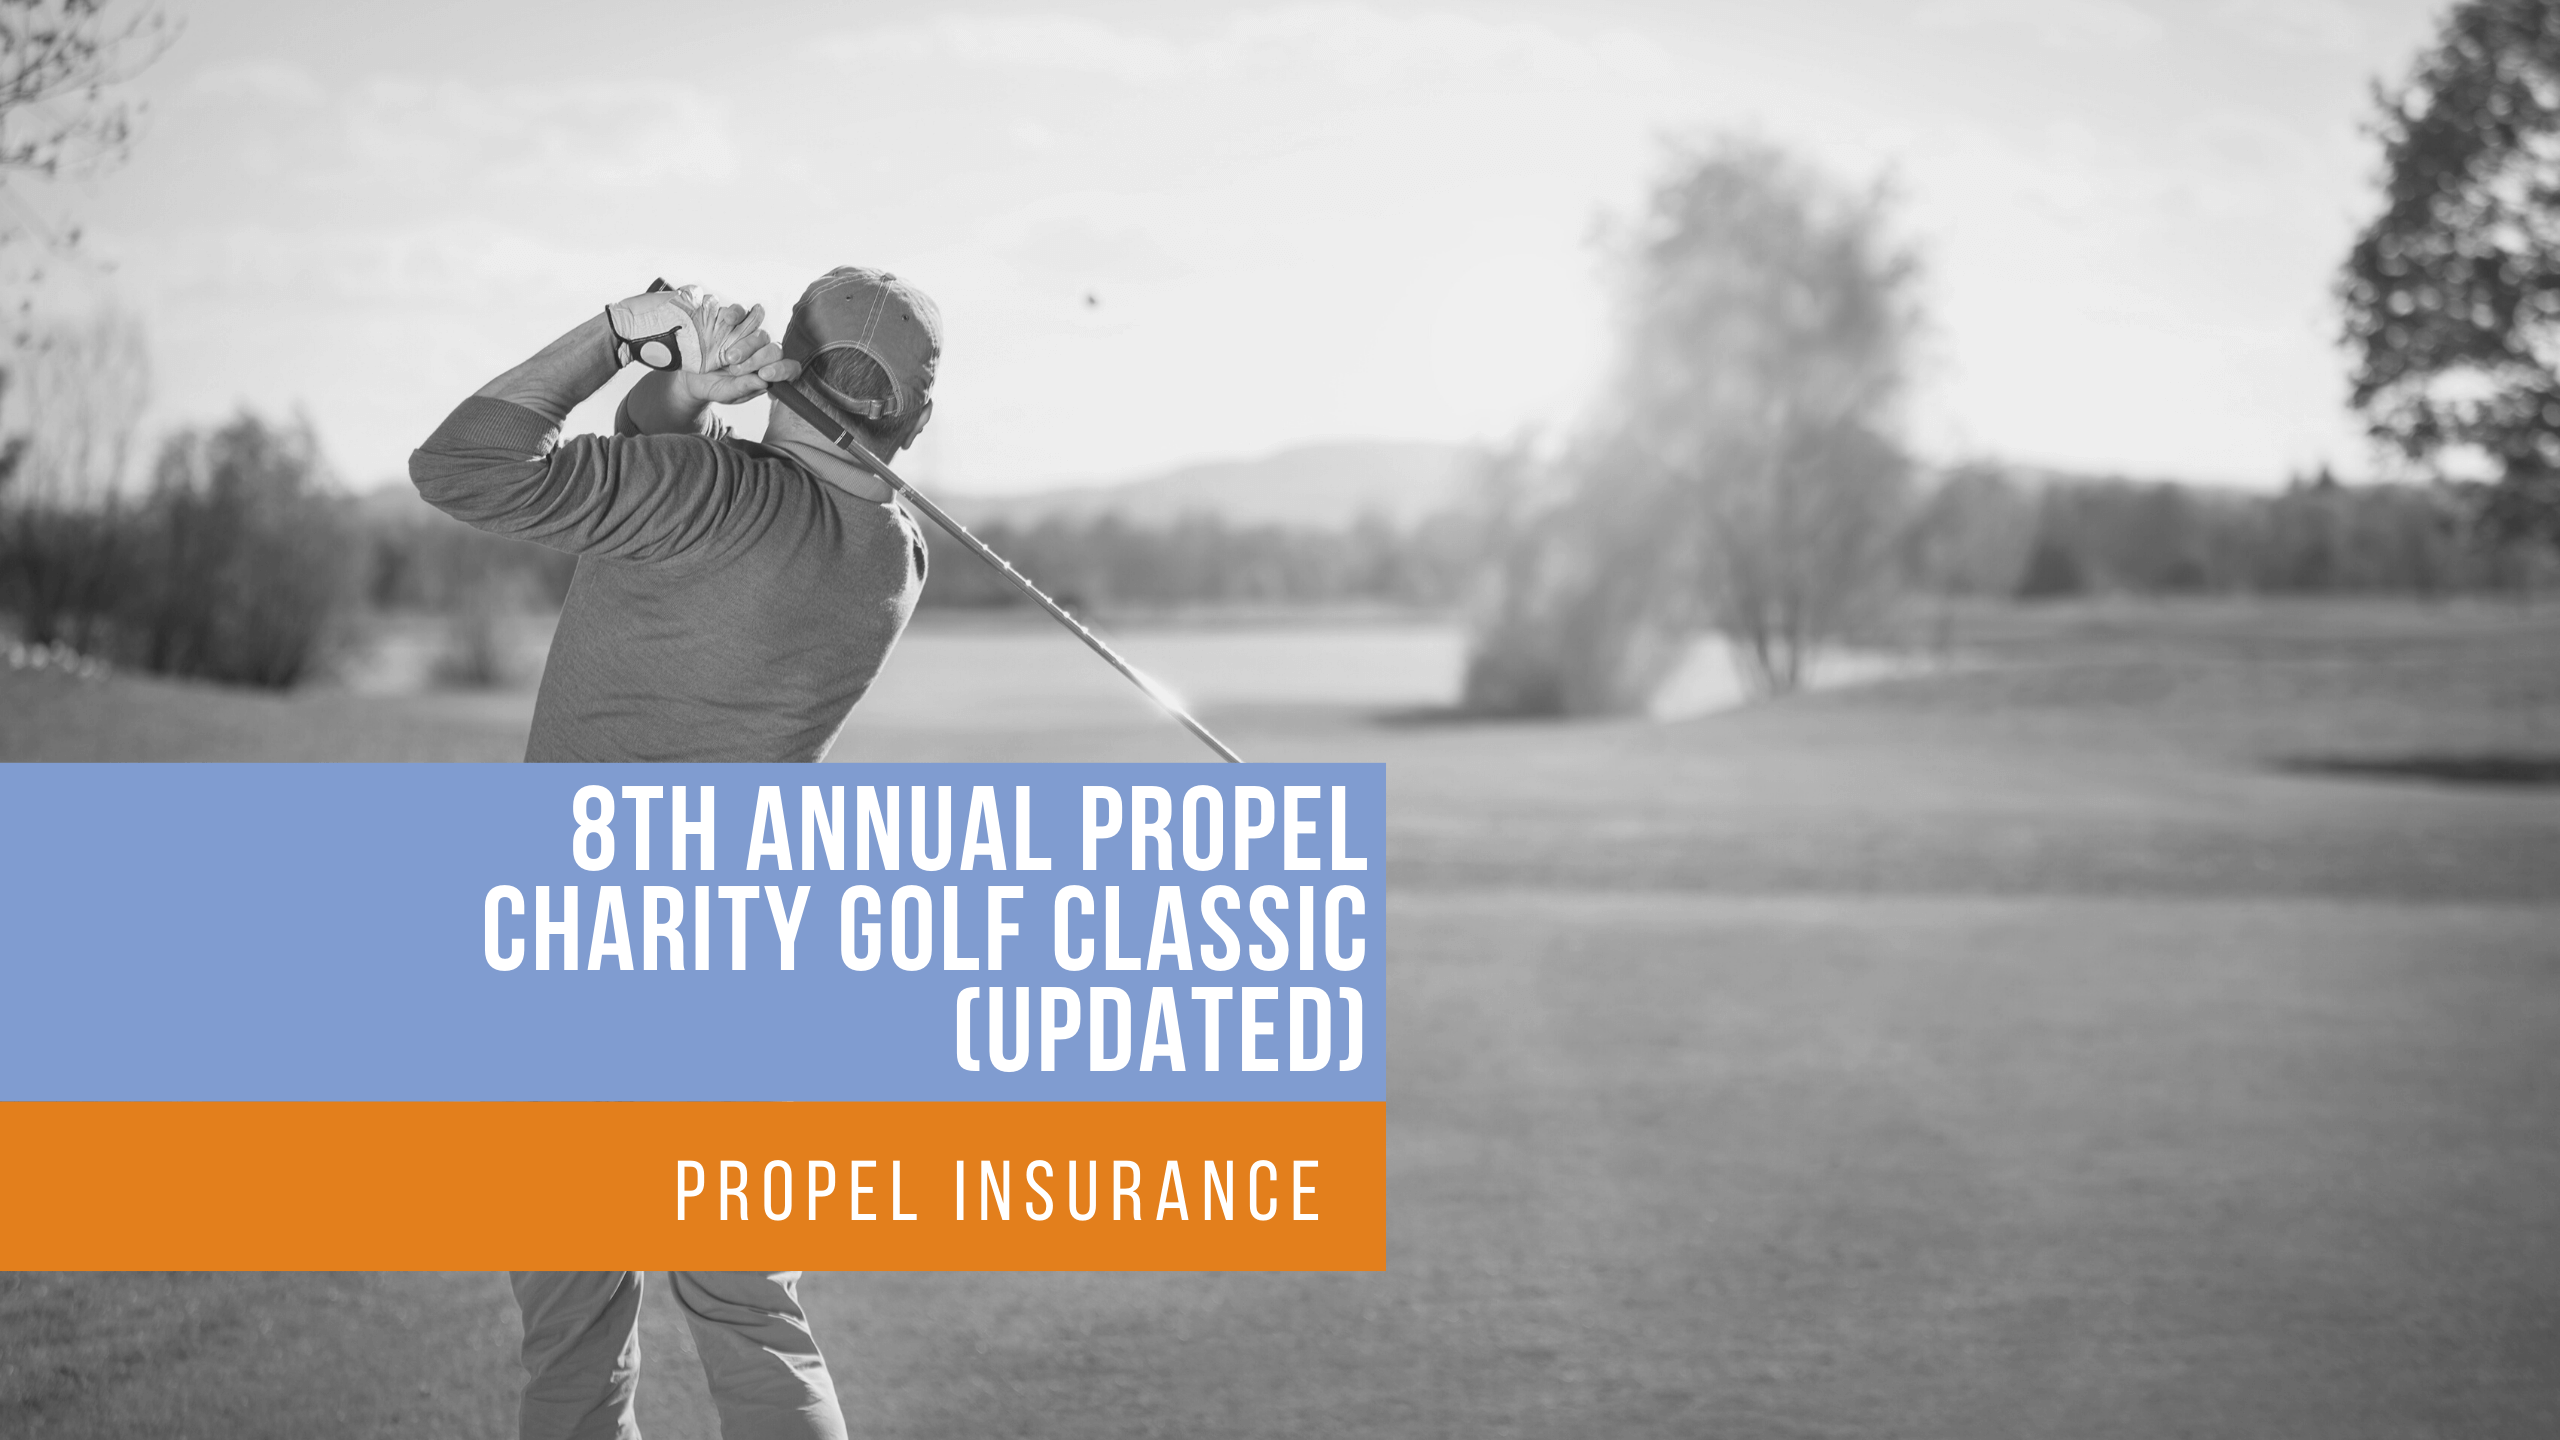 8th annual propel charity golf classic (updated)